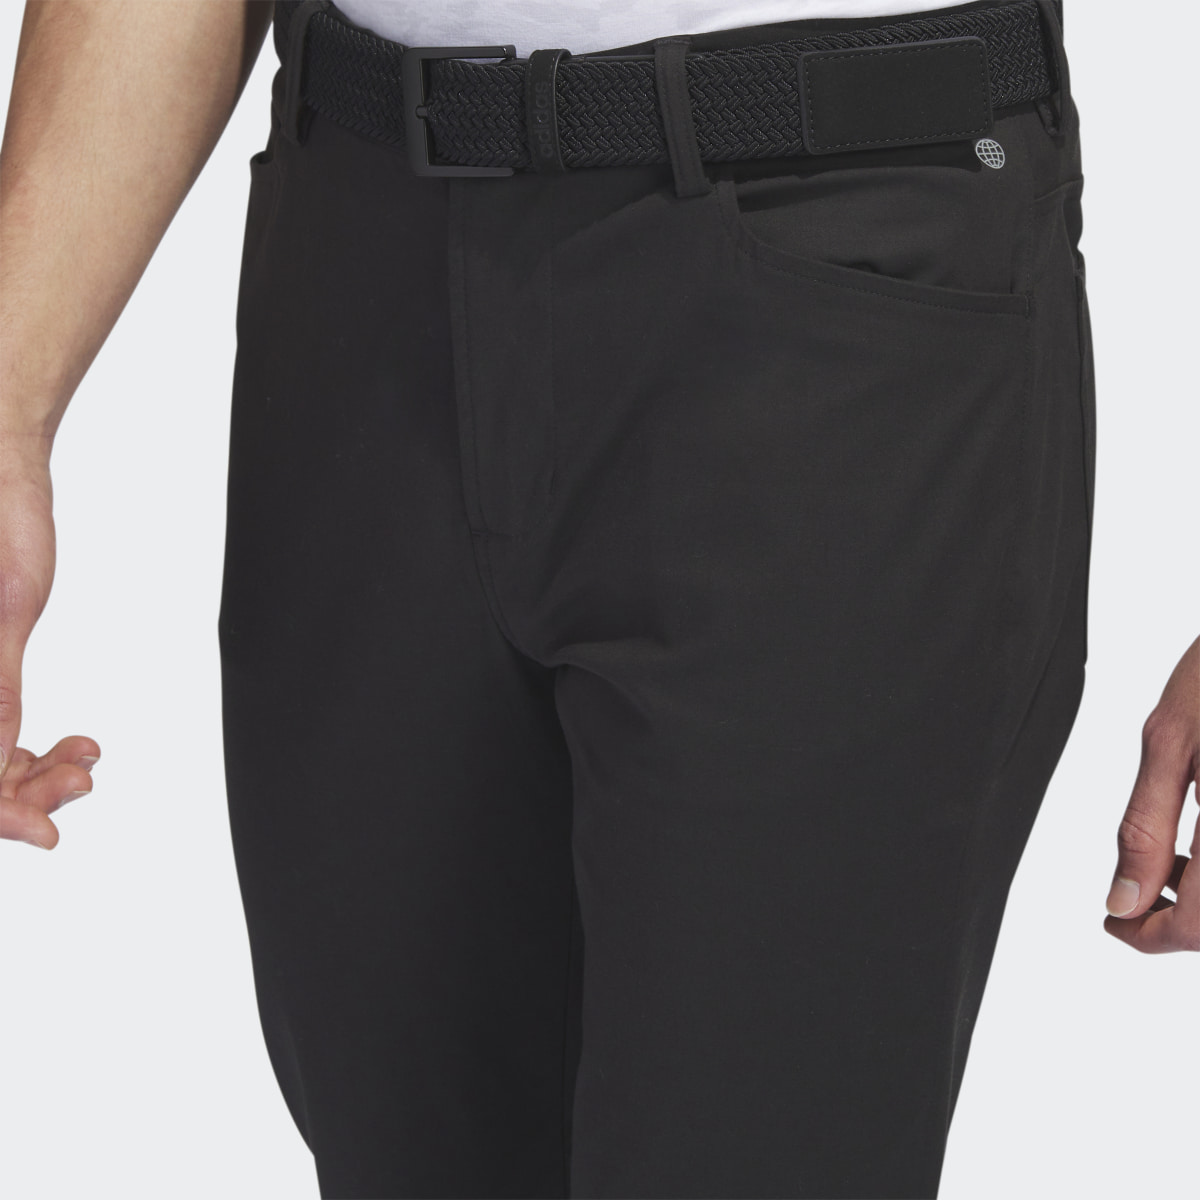 Adidas Go-To 5-Pocket Golf Trousers. 5